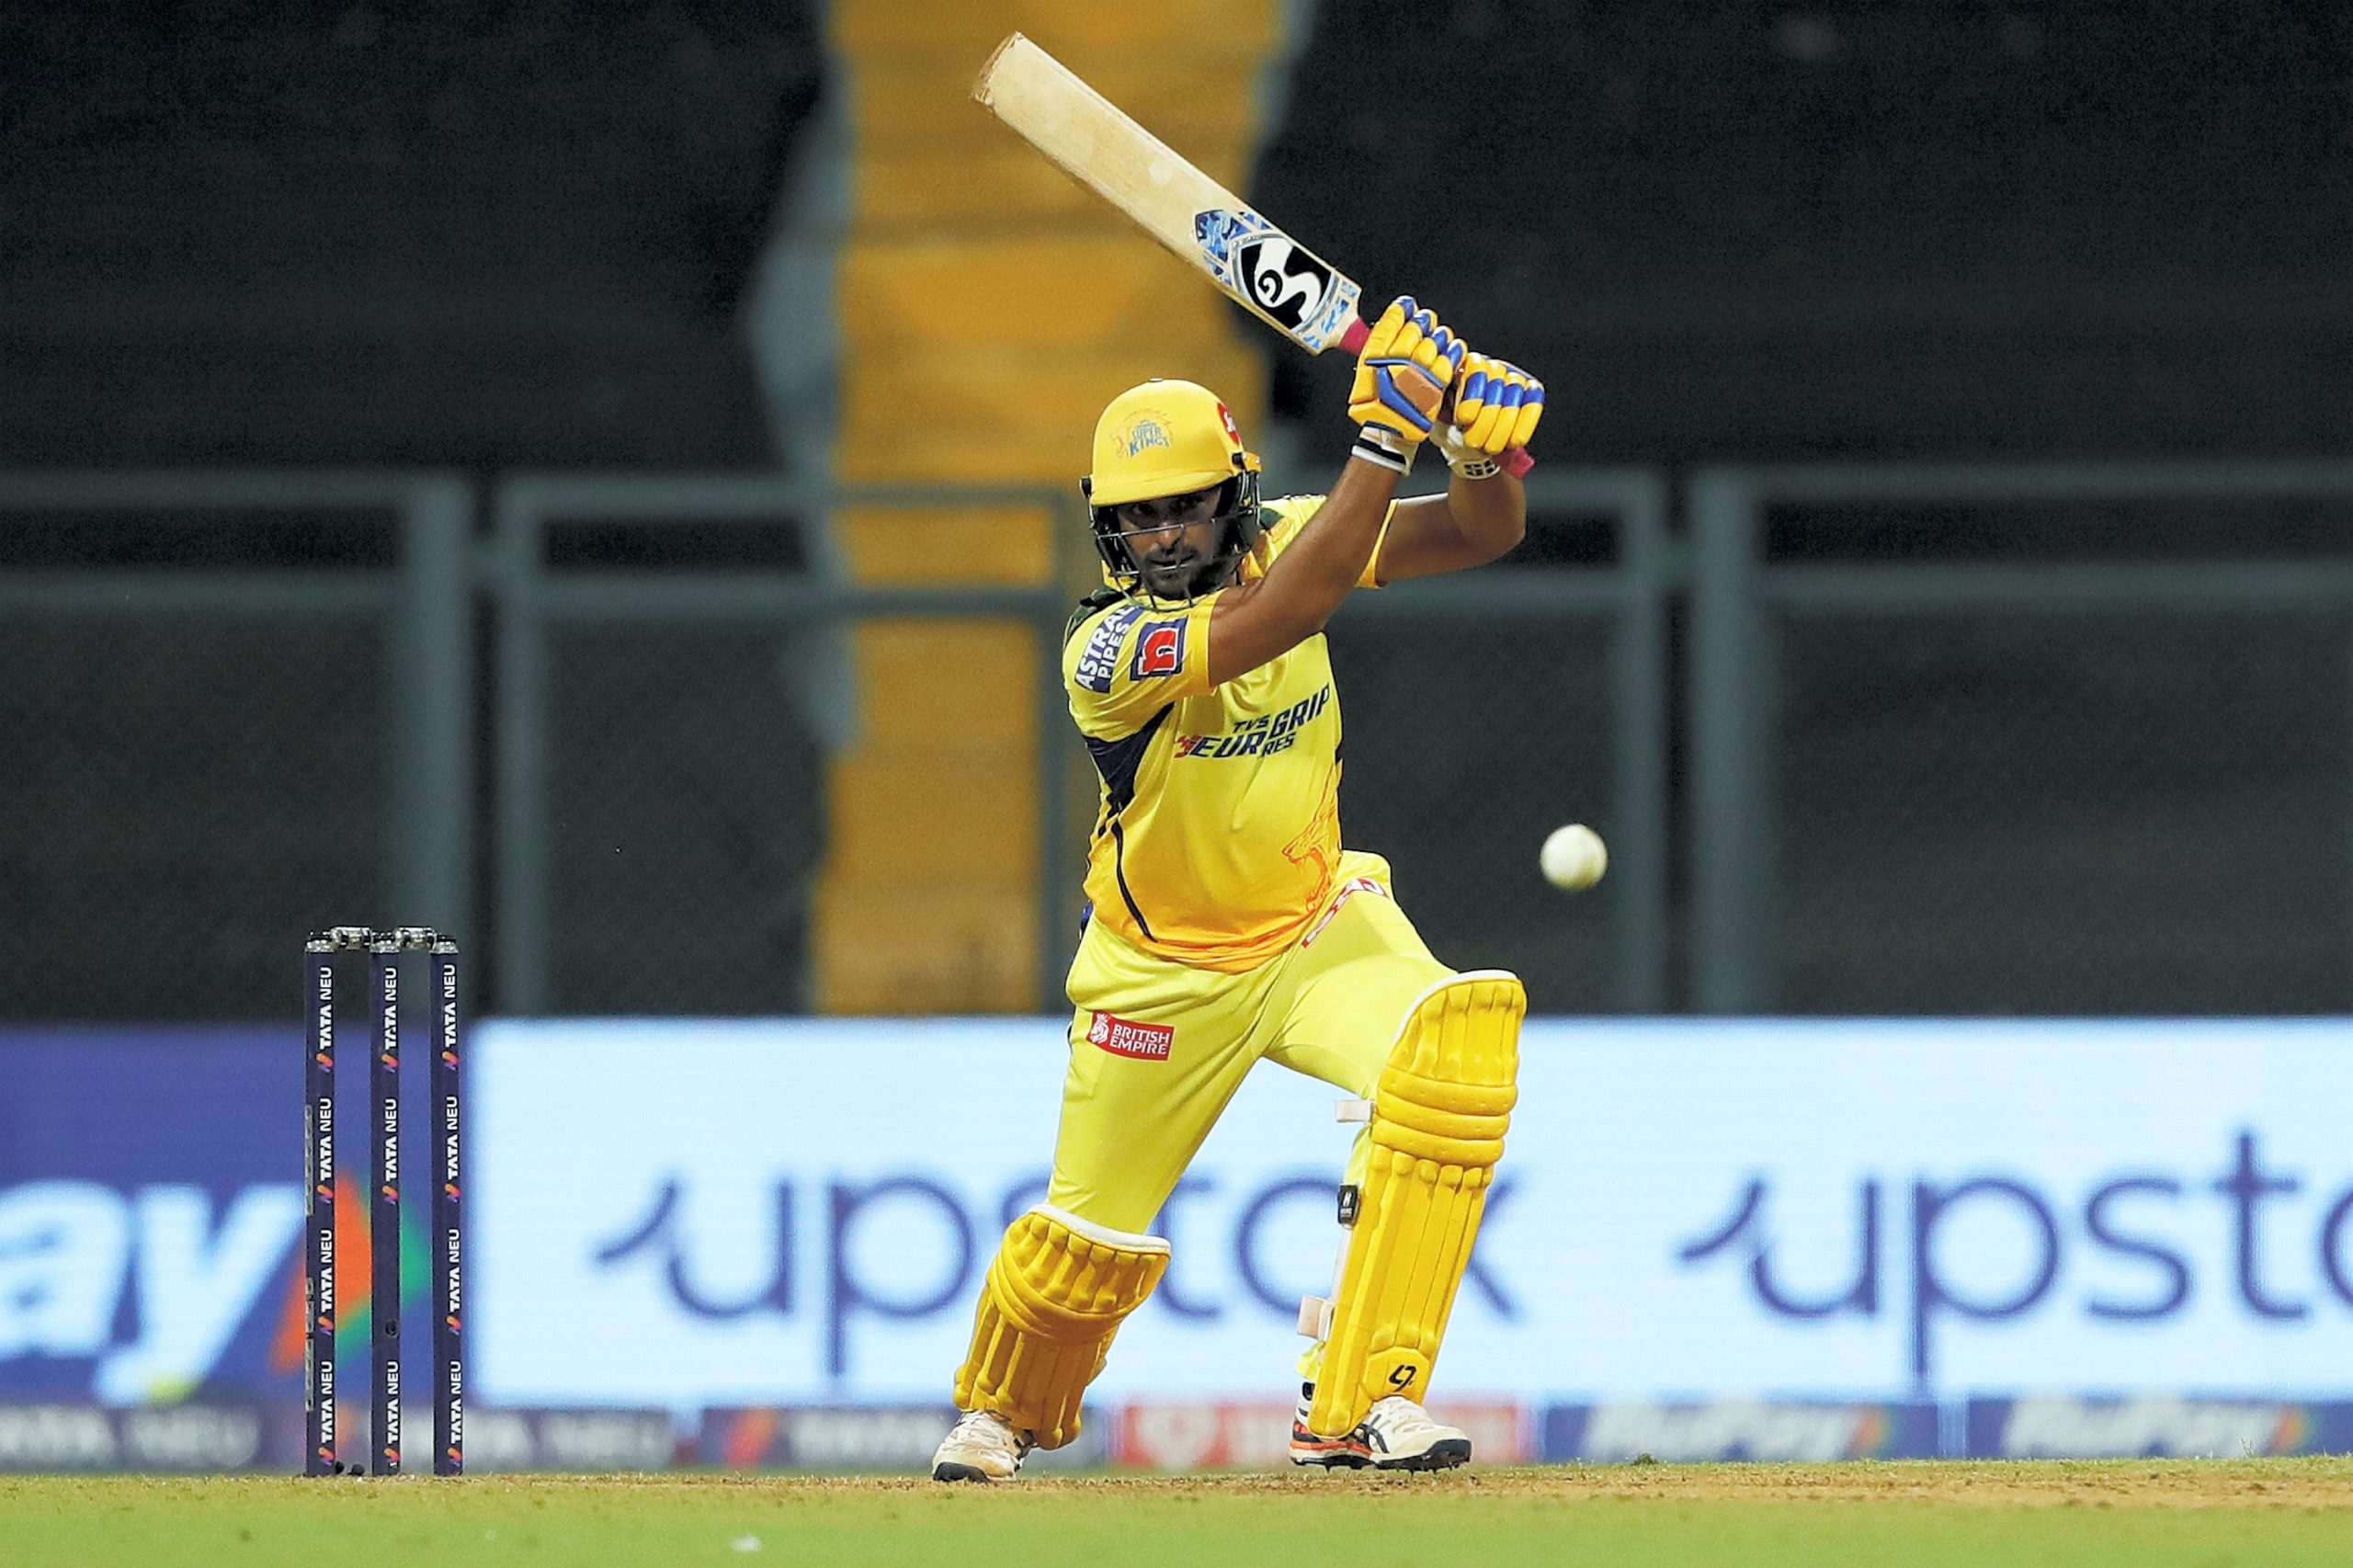 IPL 2022: Rayudu in for Dube as CSK opt to bat vs RR